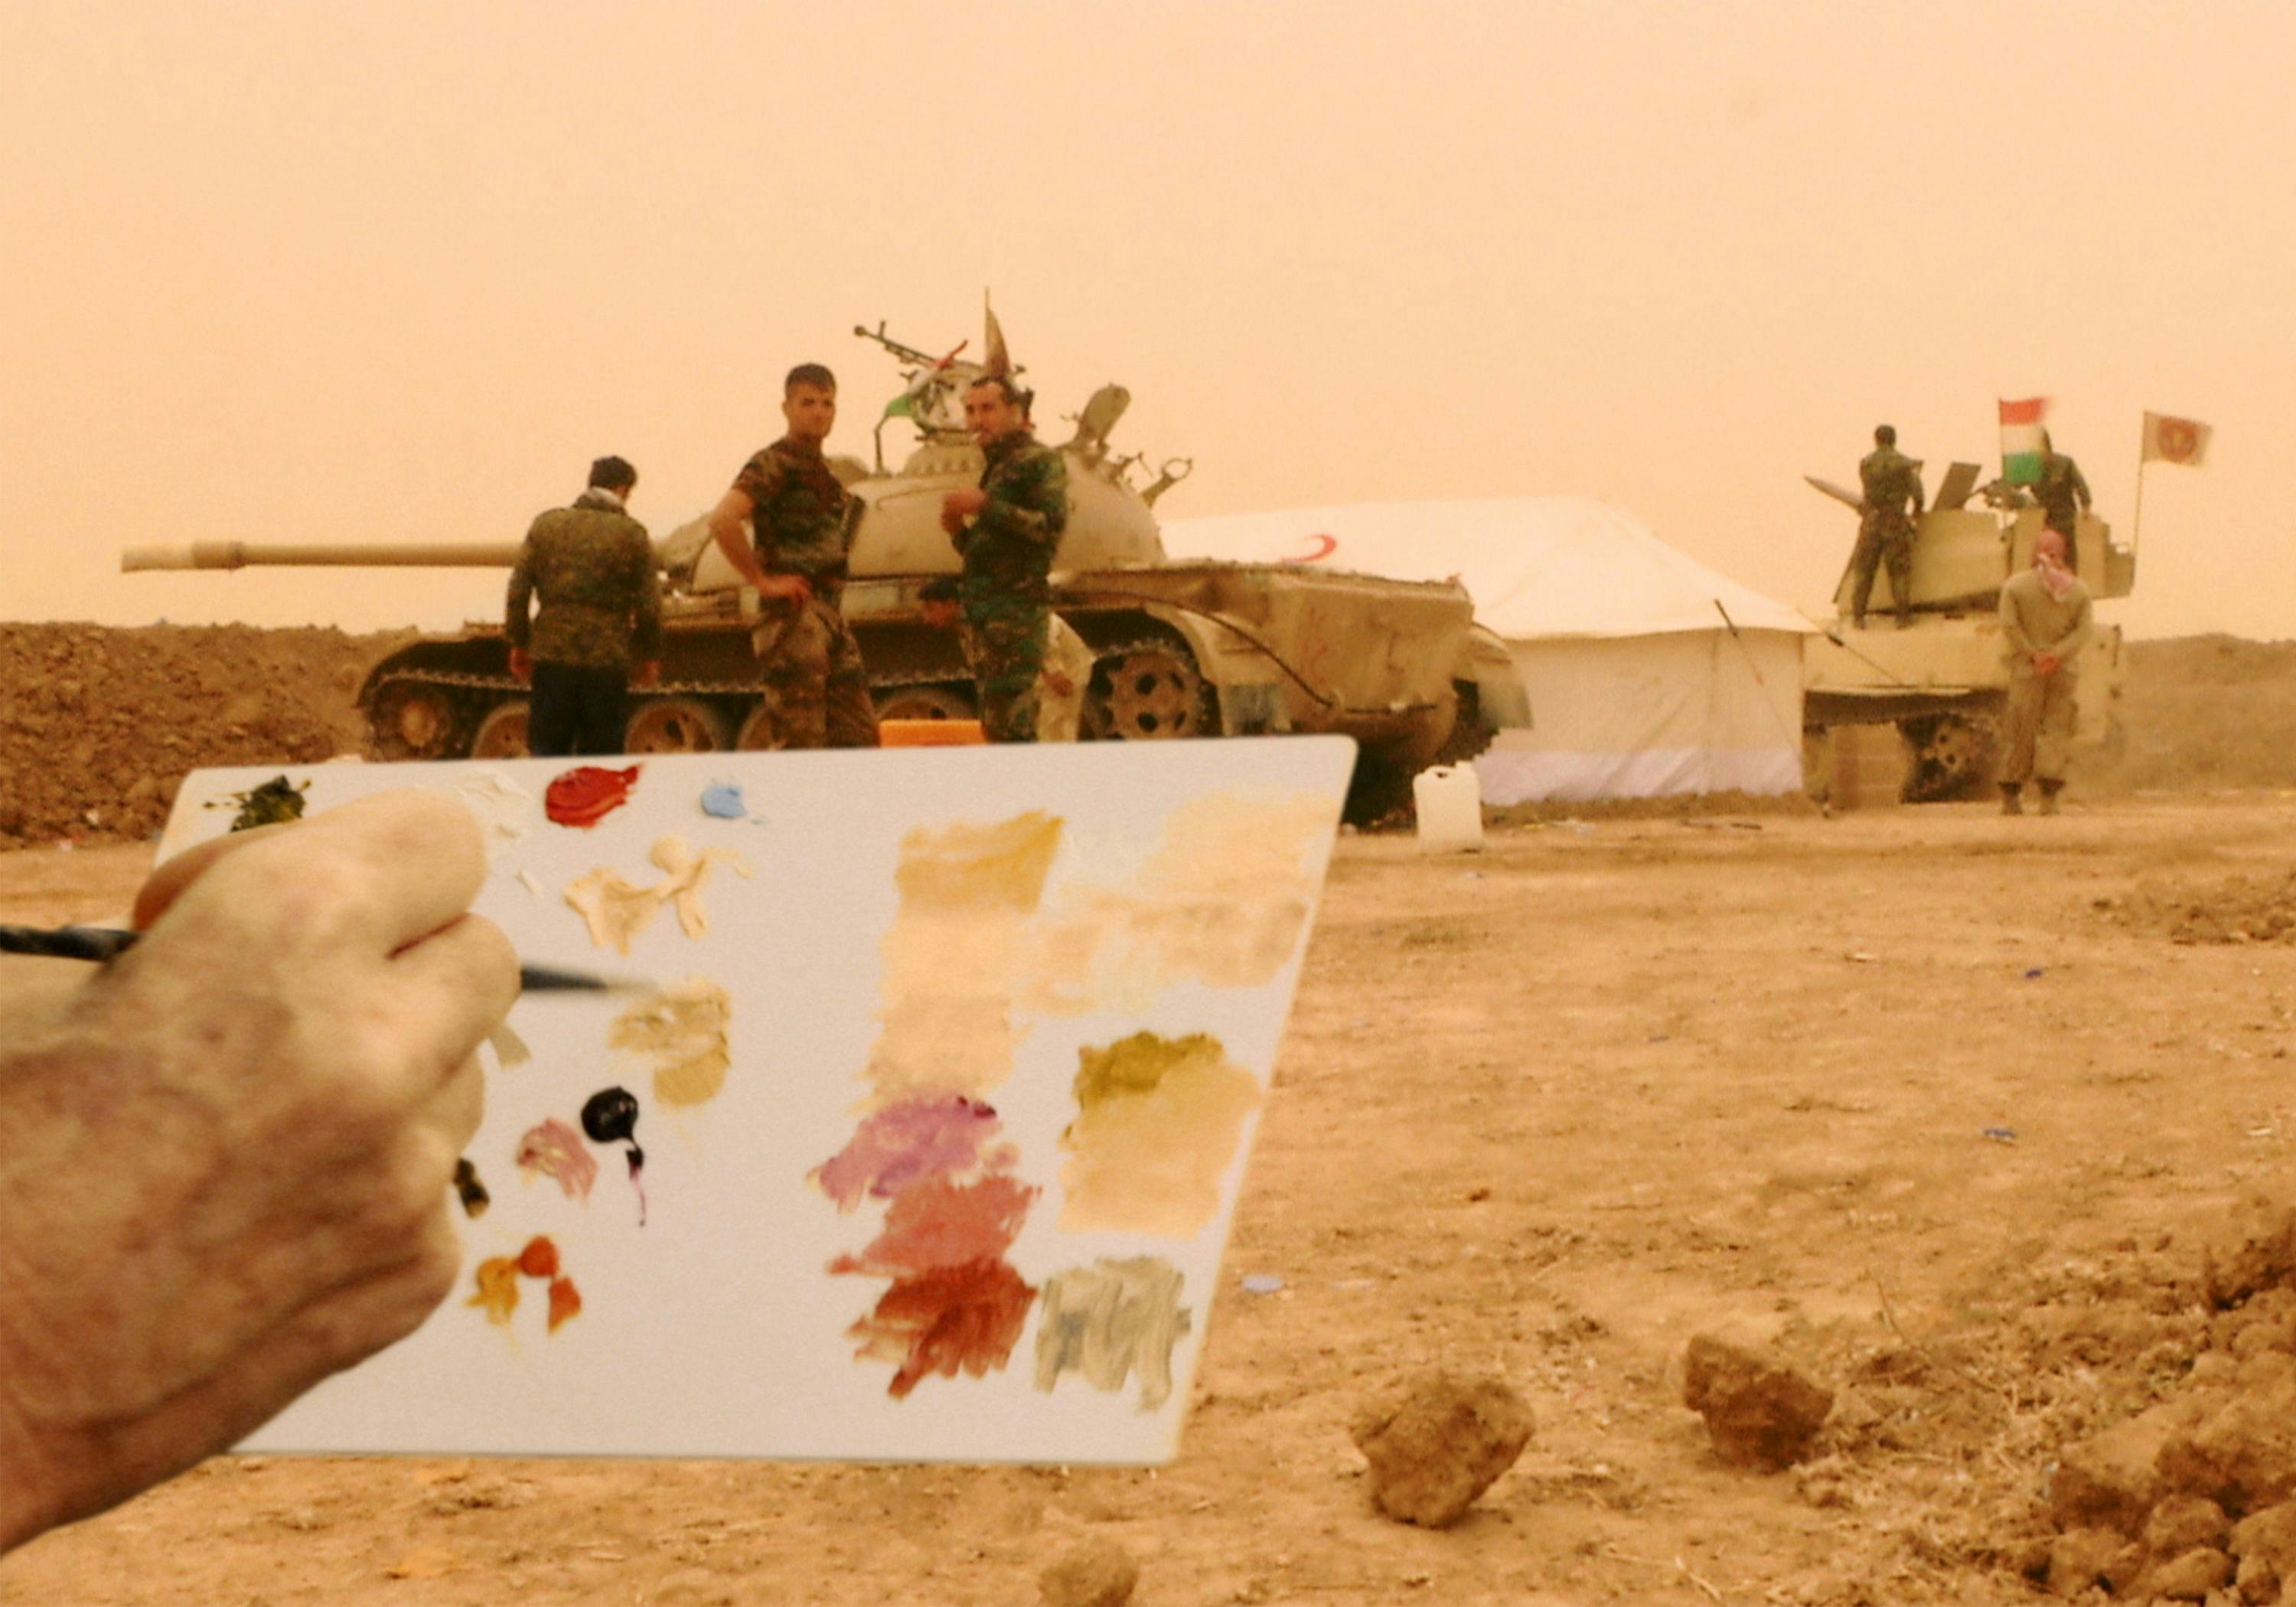 A video by Francis Alÿs, titled Color Matching (Mosul, Iraq), dated 2016.